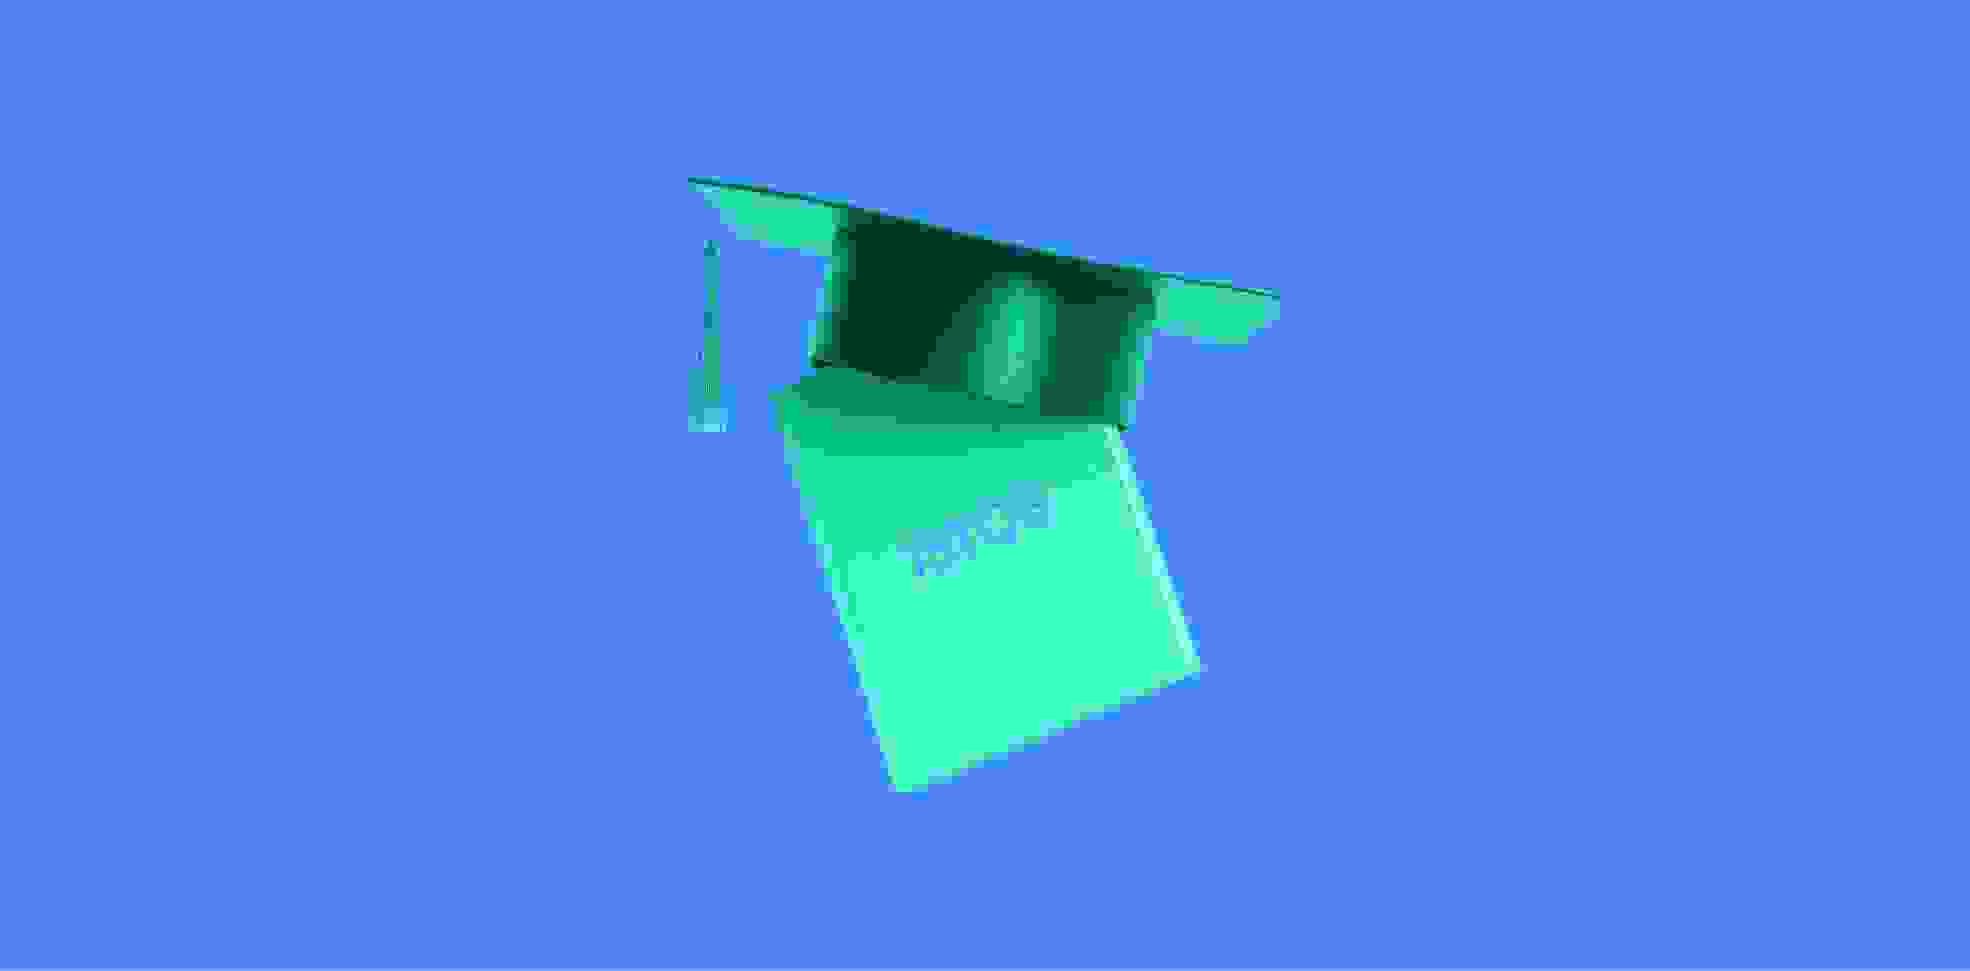 notebook and professor's hat on a blue background